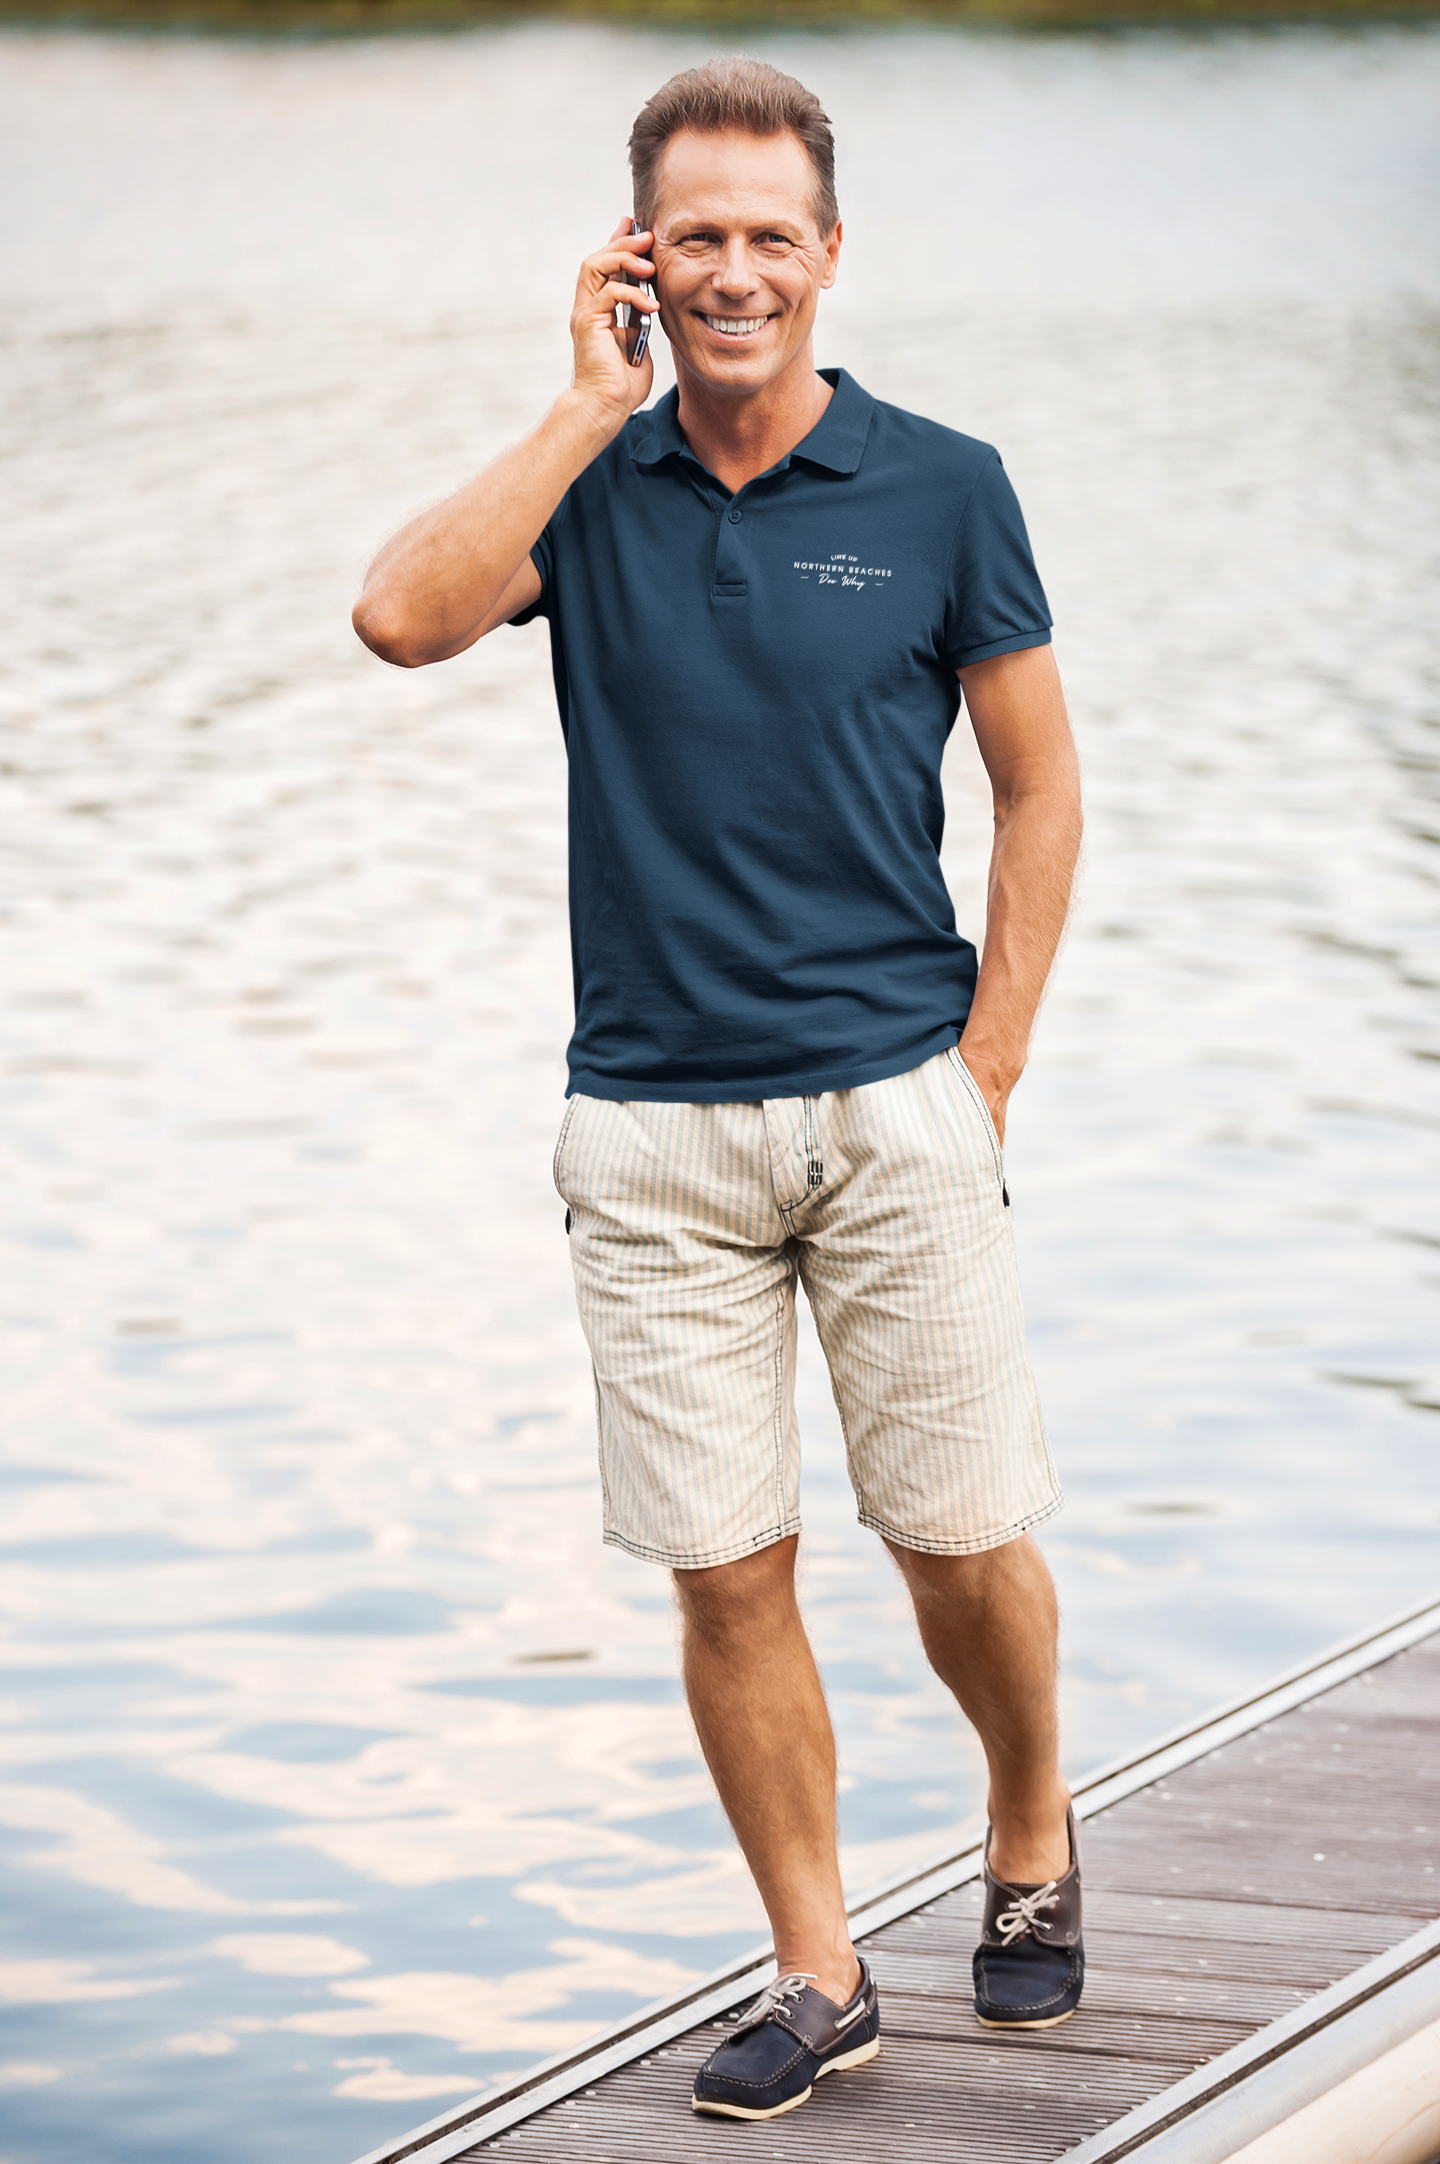 Cotton Polo Shirts Northern Beaches logo Navy and Sandstone